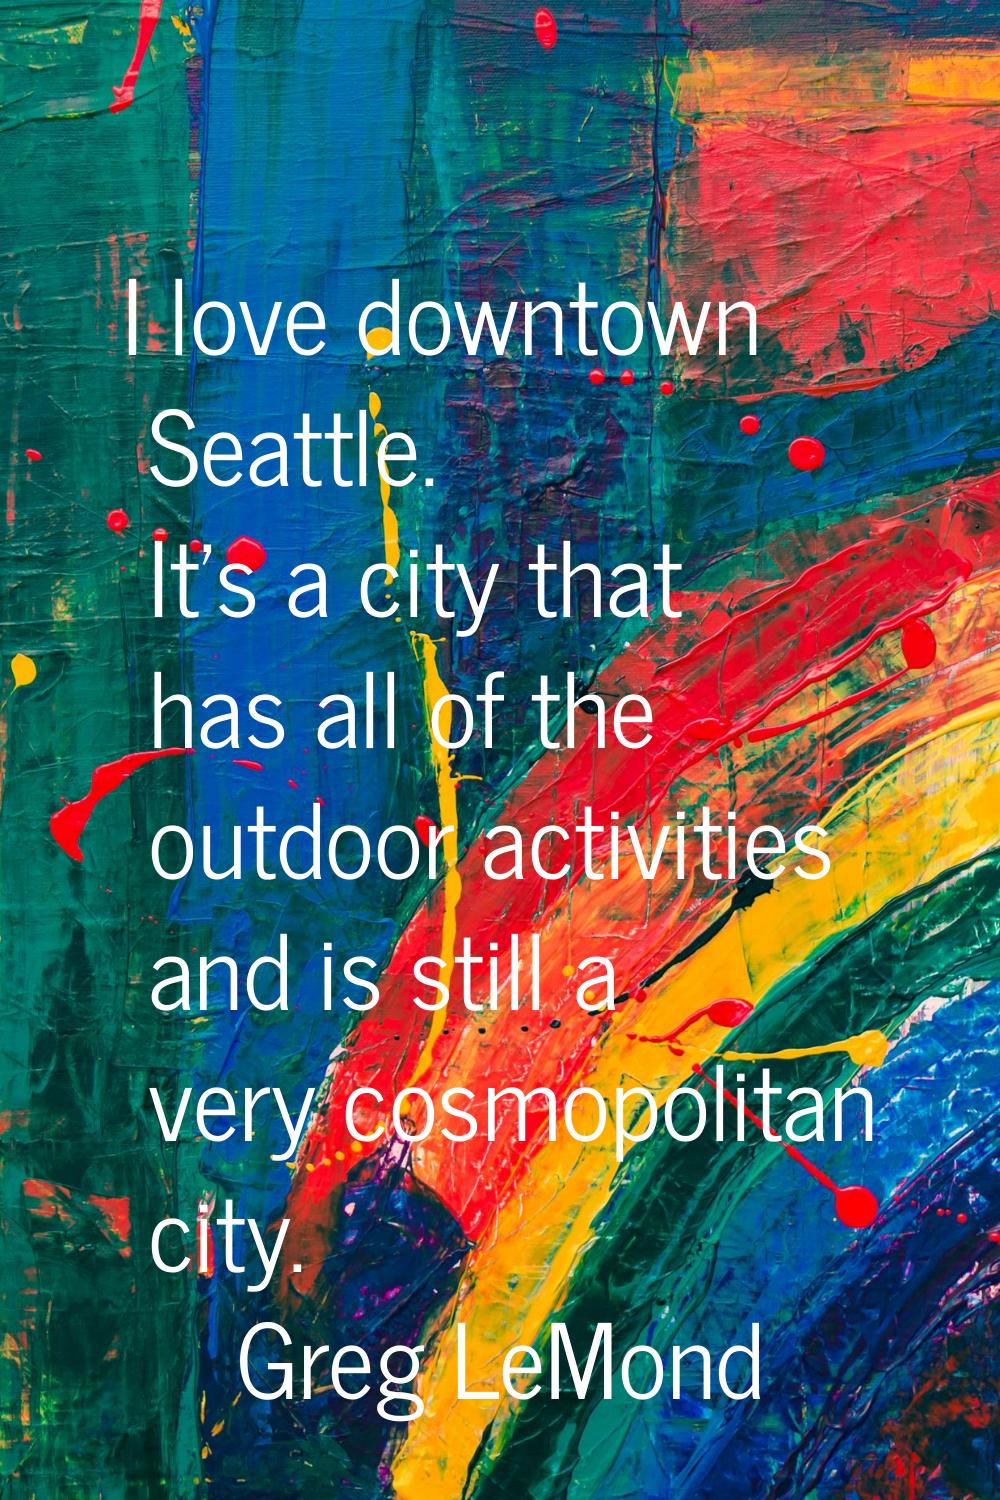 I love downtown Seattle. It's a city that has all of the outdoor activities and is still a very cos